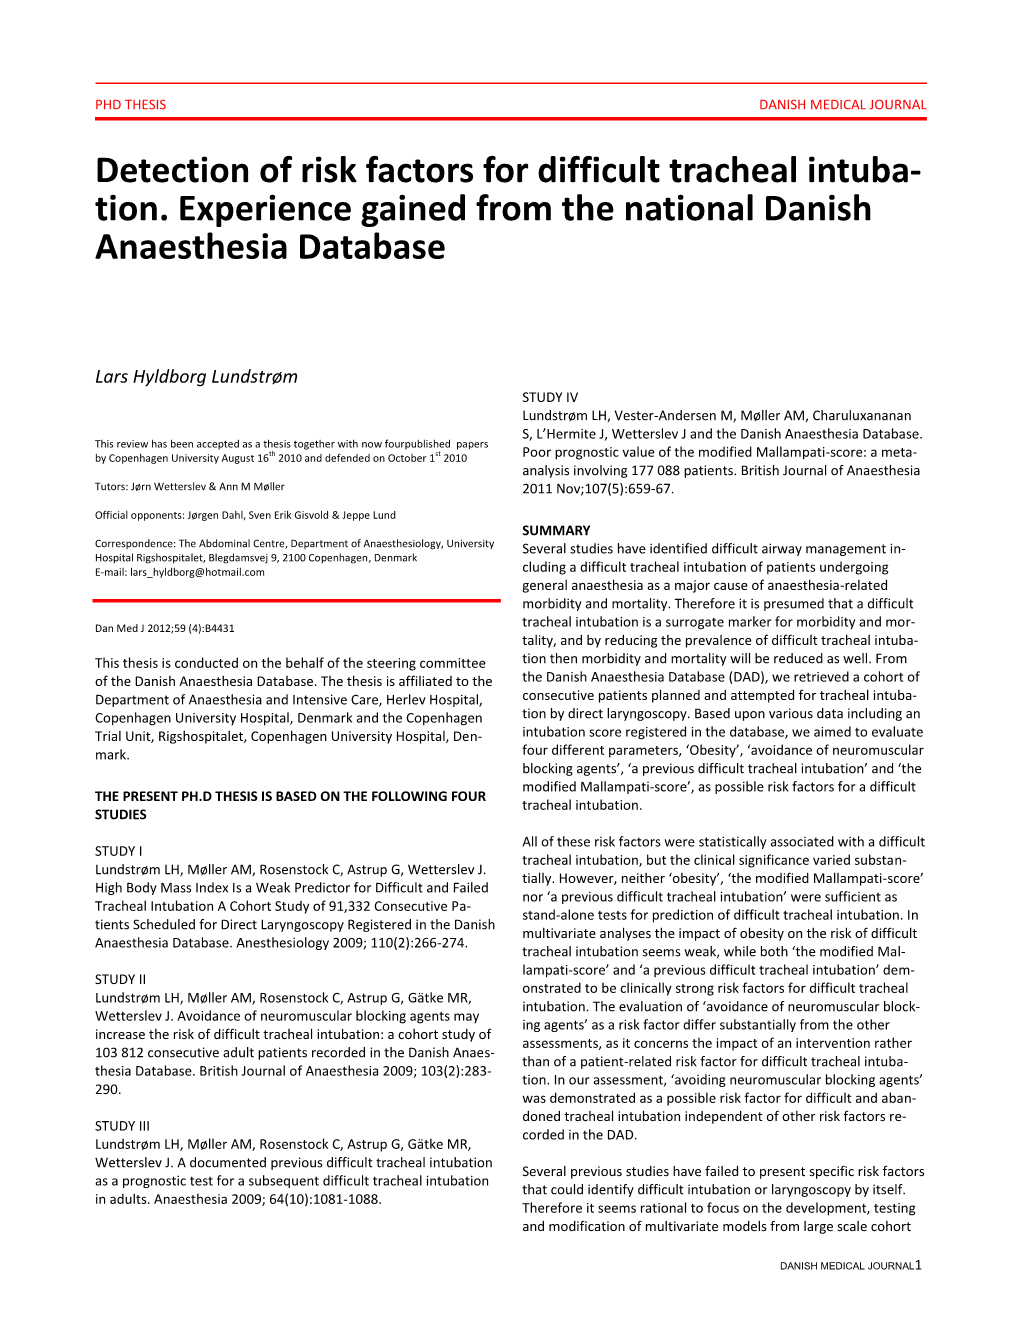 Detection of Risk Factors for Difficult Tracheal Intuba- Tion. Experience Gained from the National Danish Anaesthesia Database